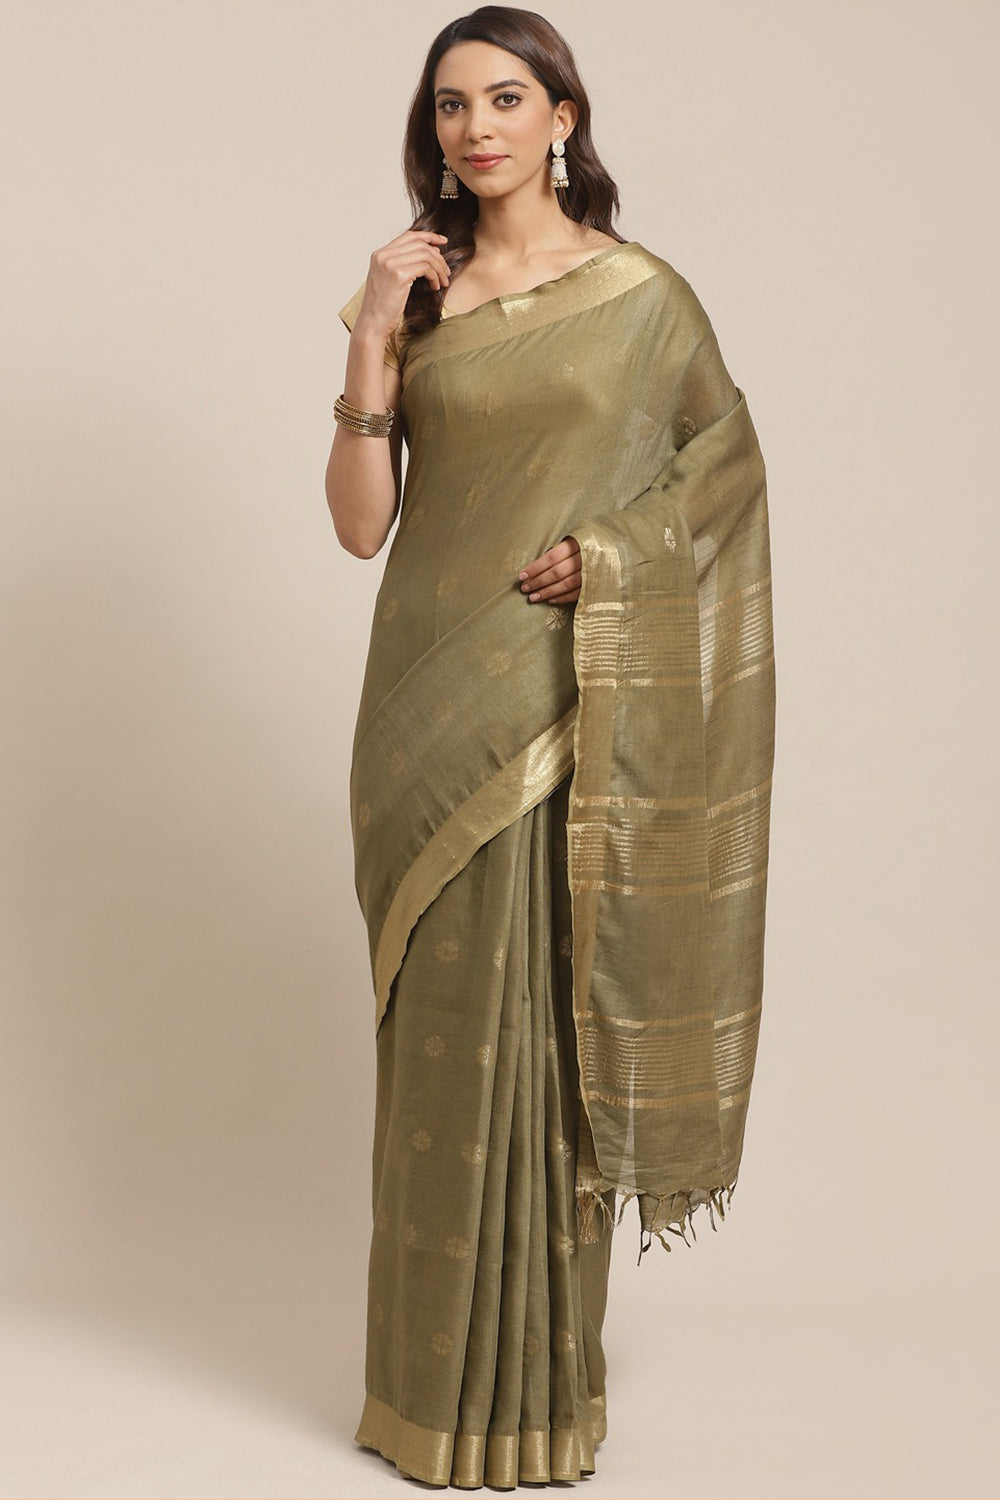 Buy Olive Woven Linen One Minute Saree